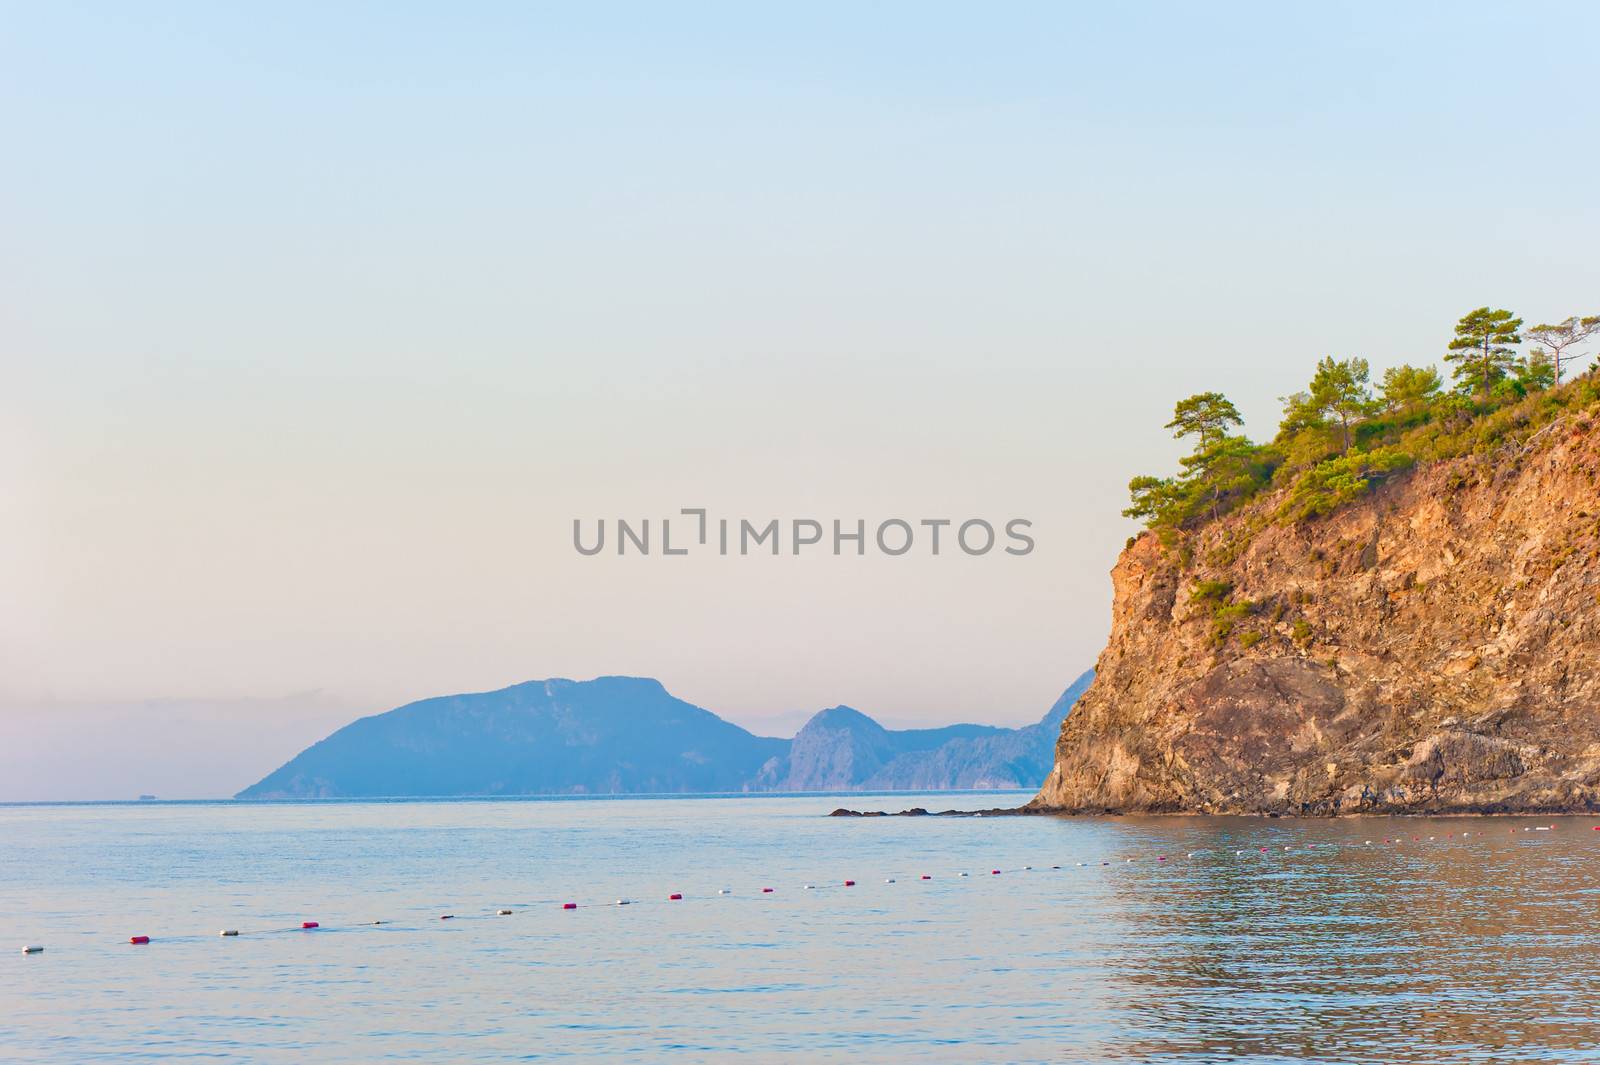 growing trees on a steep rocky shore at the calm sea